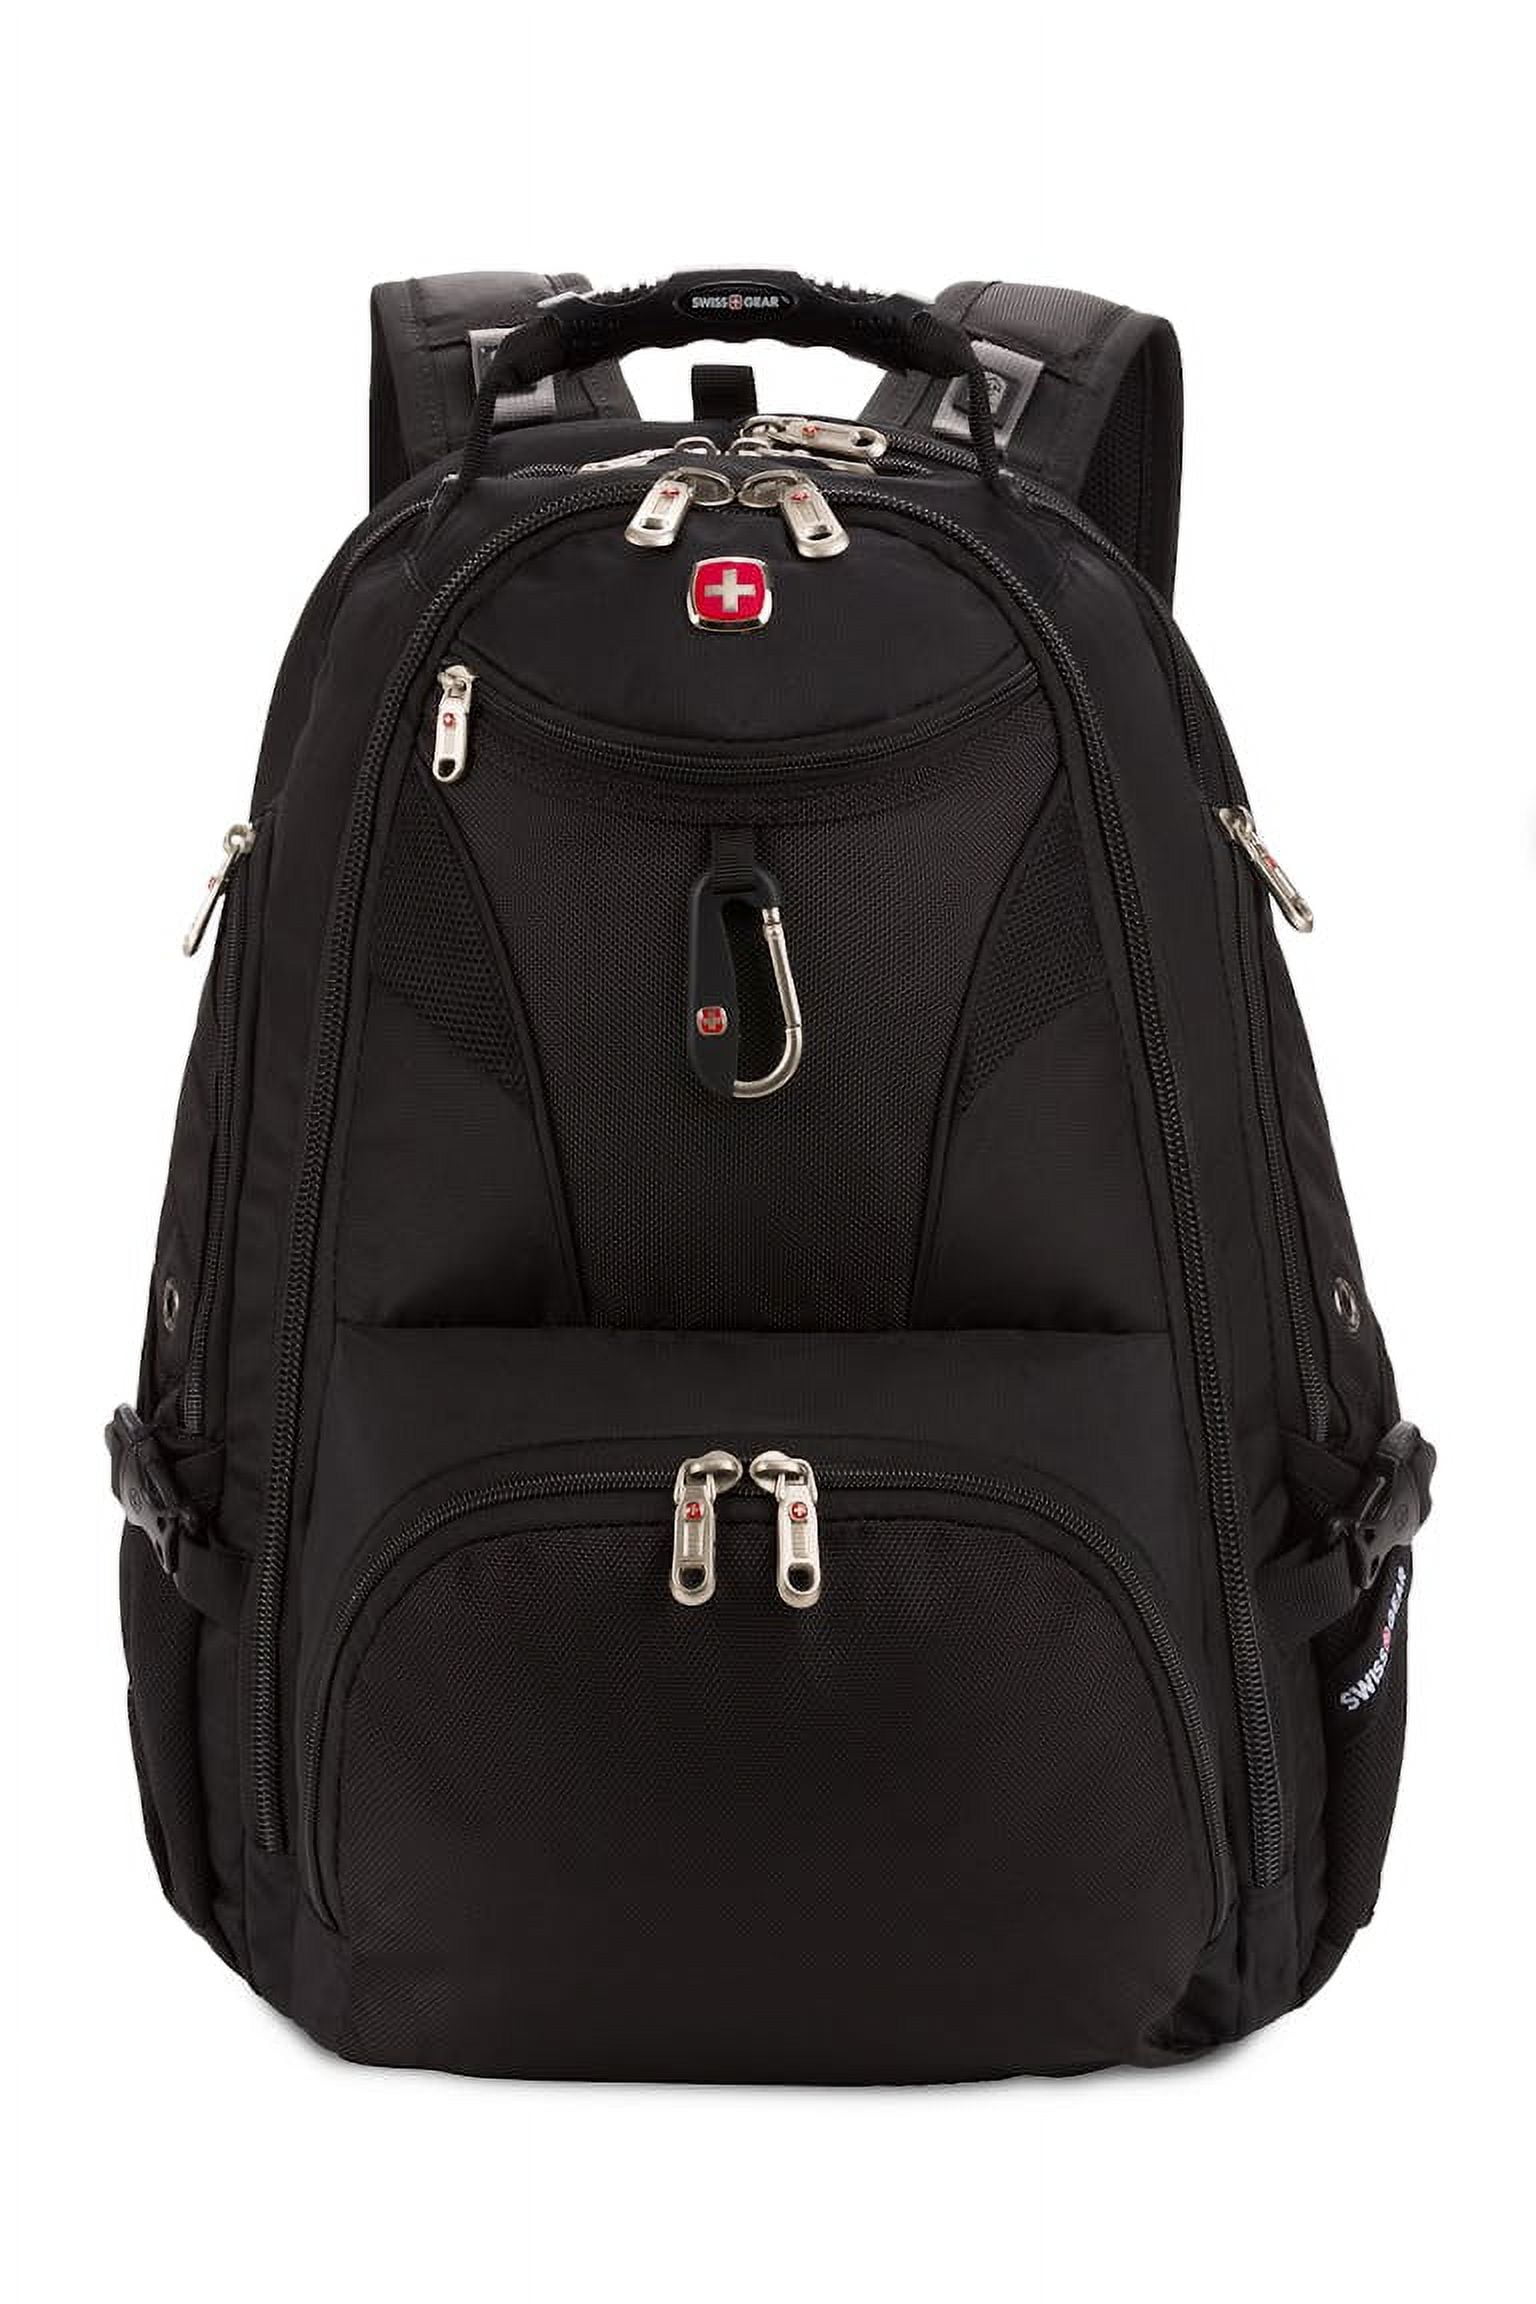 Swiss Gear Backpack with 17.3 “Computer Section – Elegant Bag